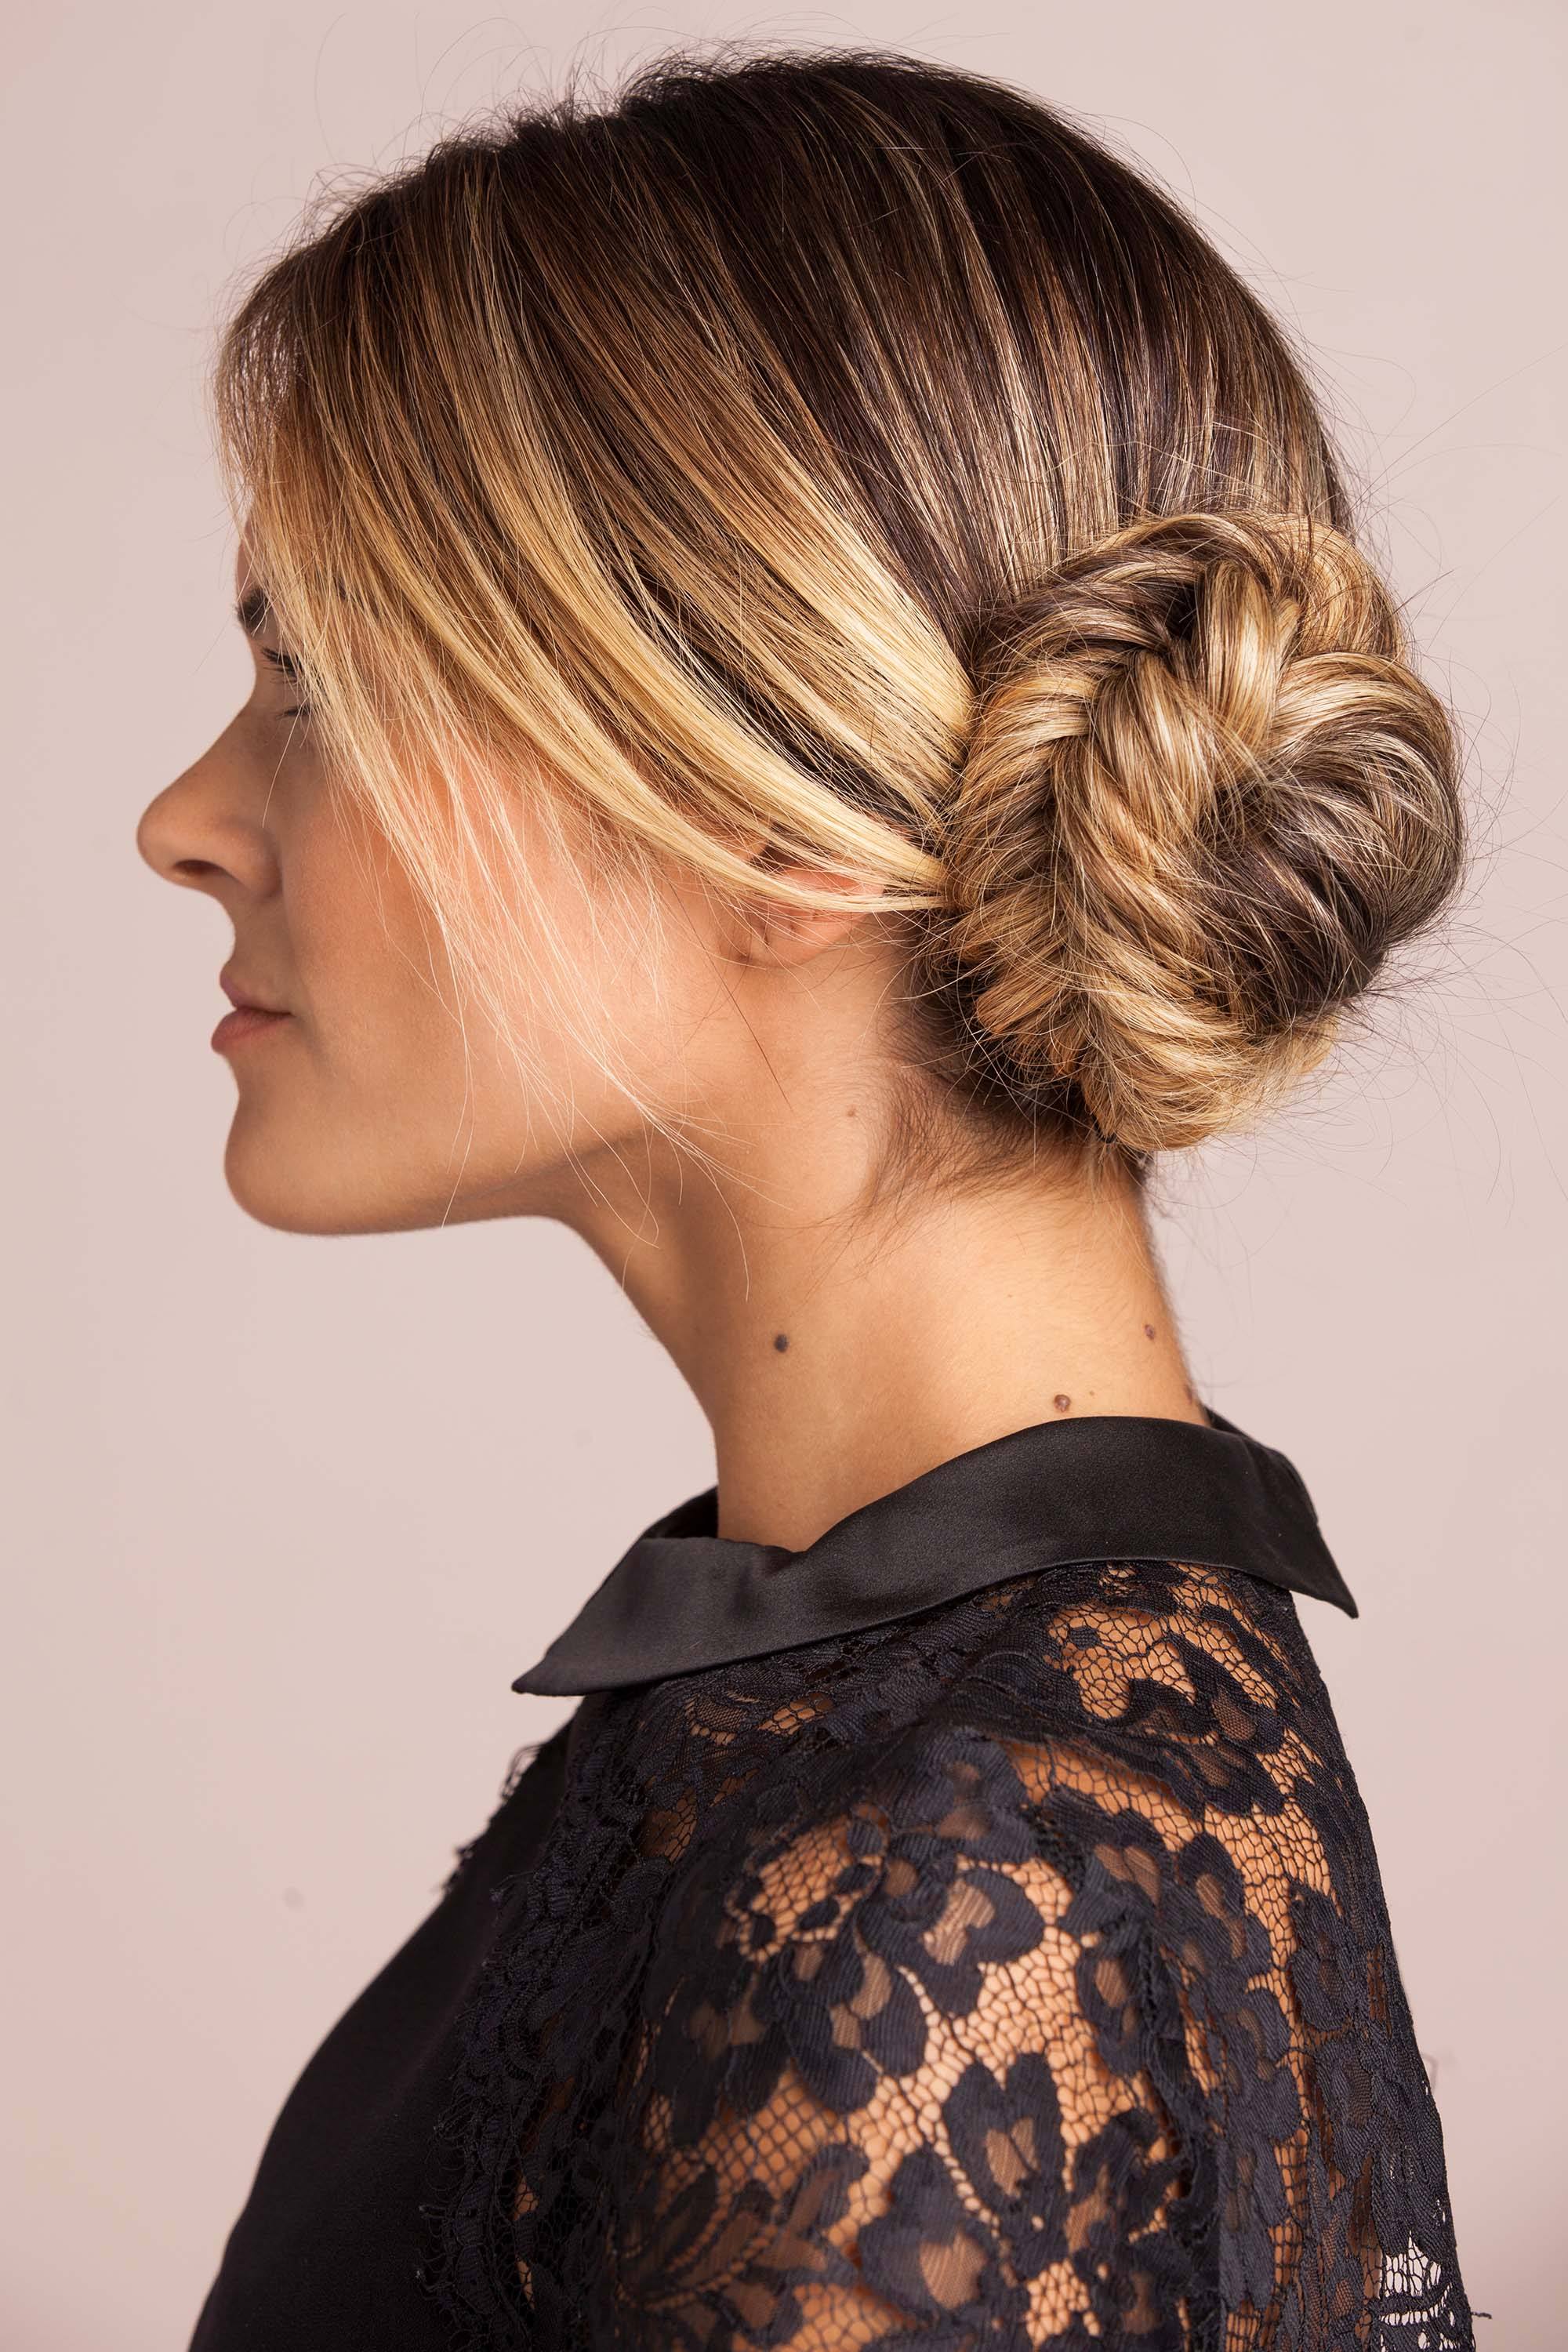 75 Trendiest Updo Hairstyles 2021 : Twisted & knot bun for fine straight  hair